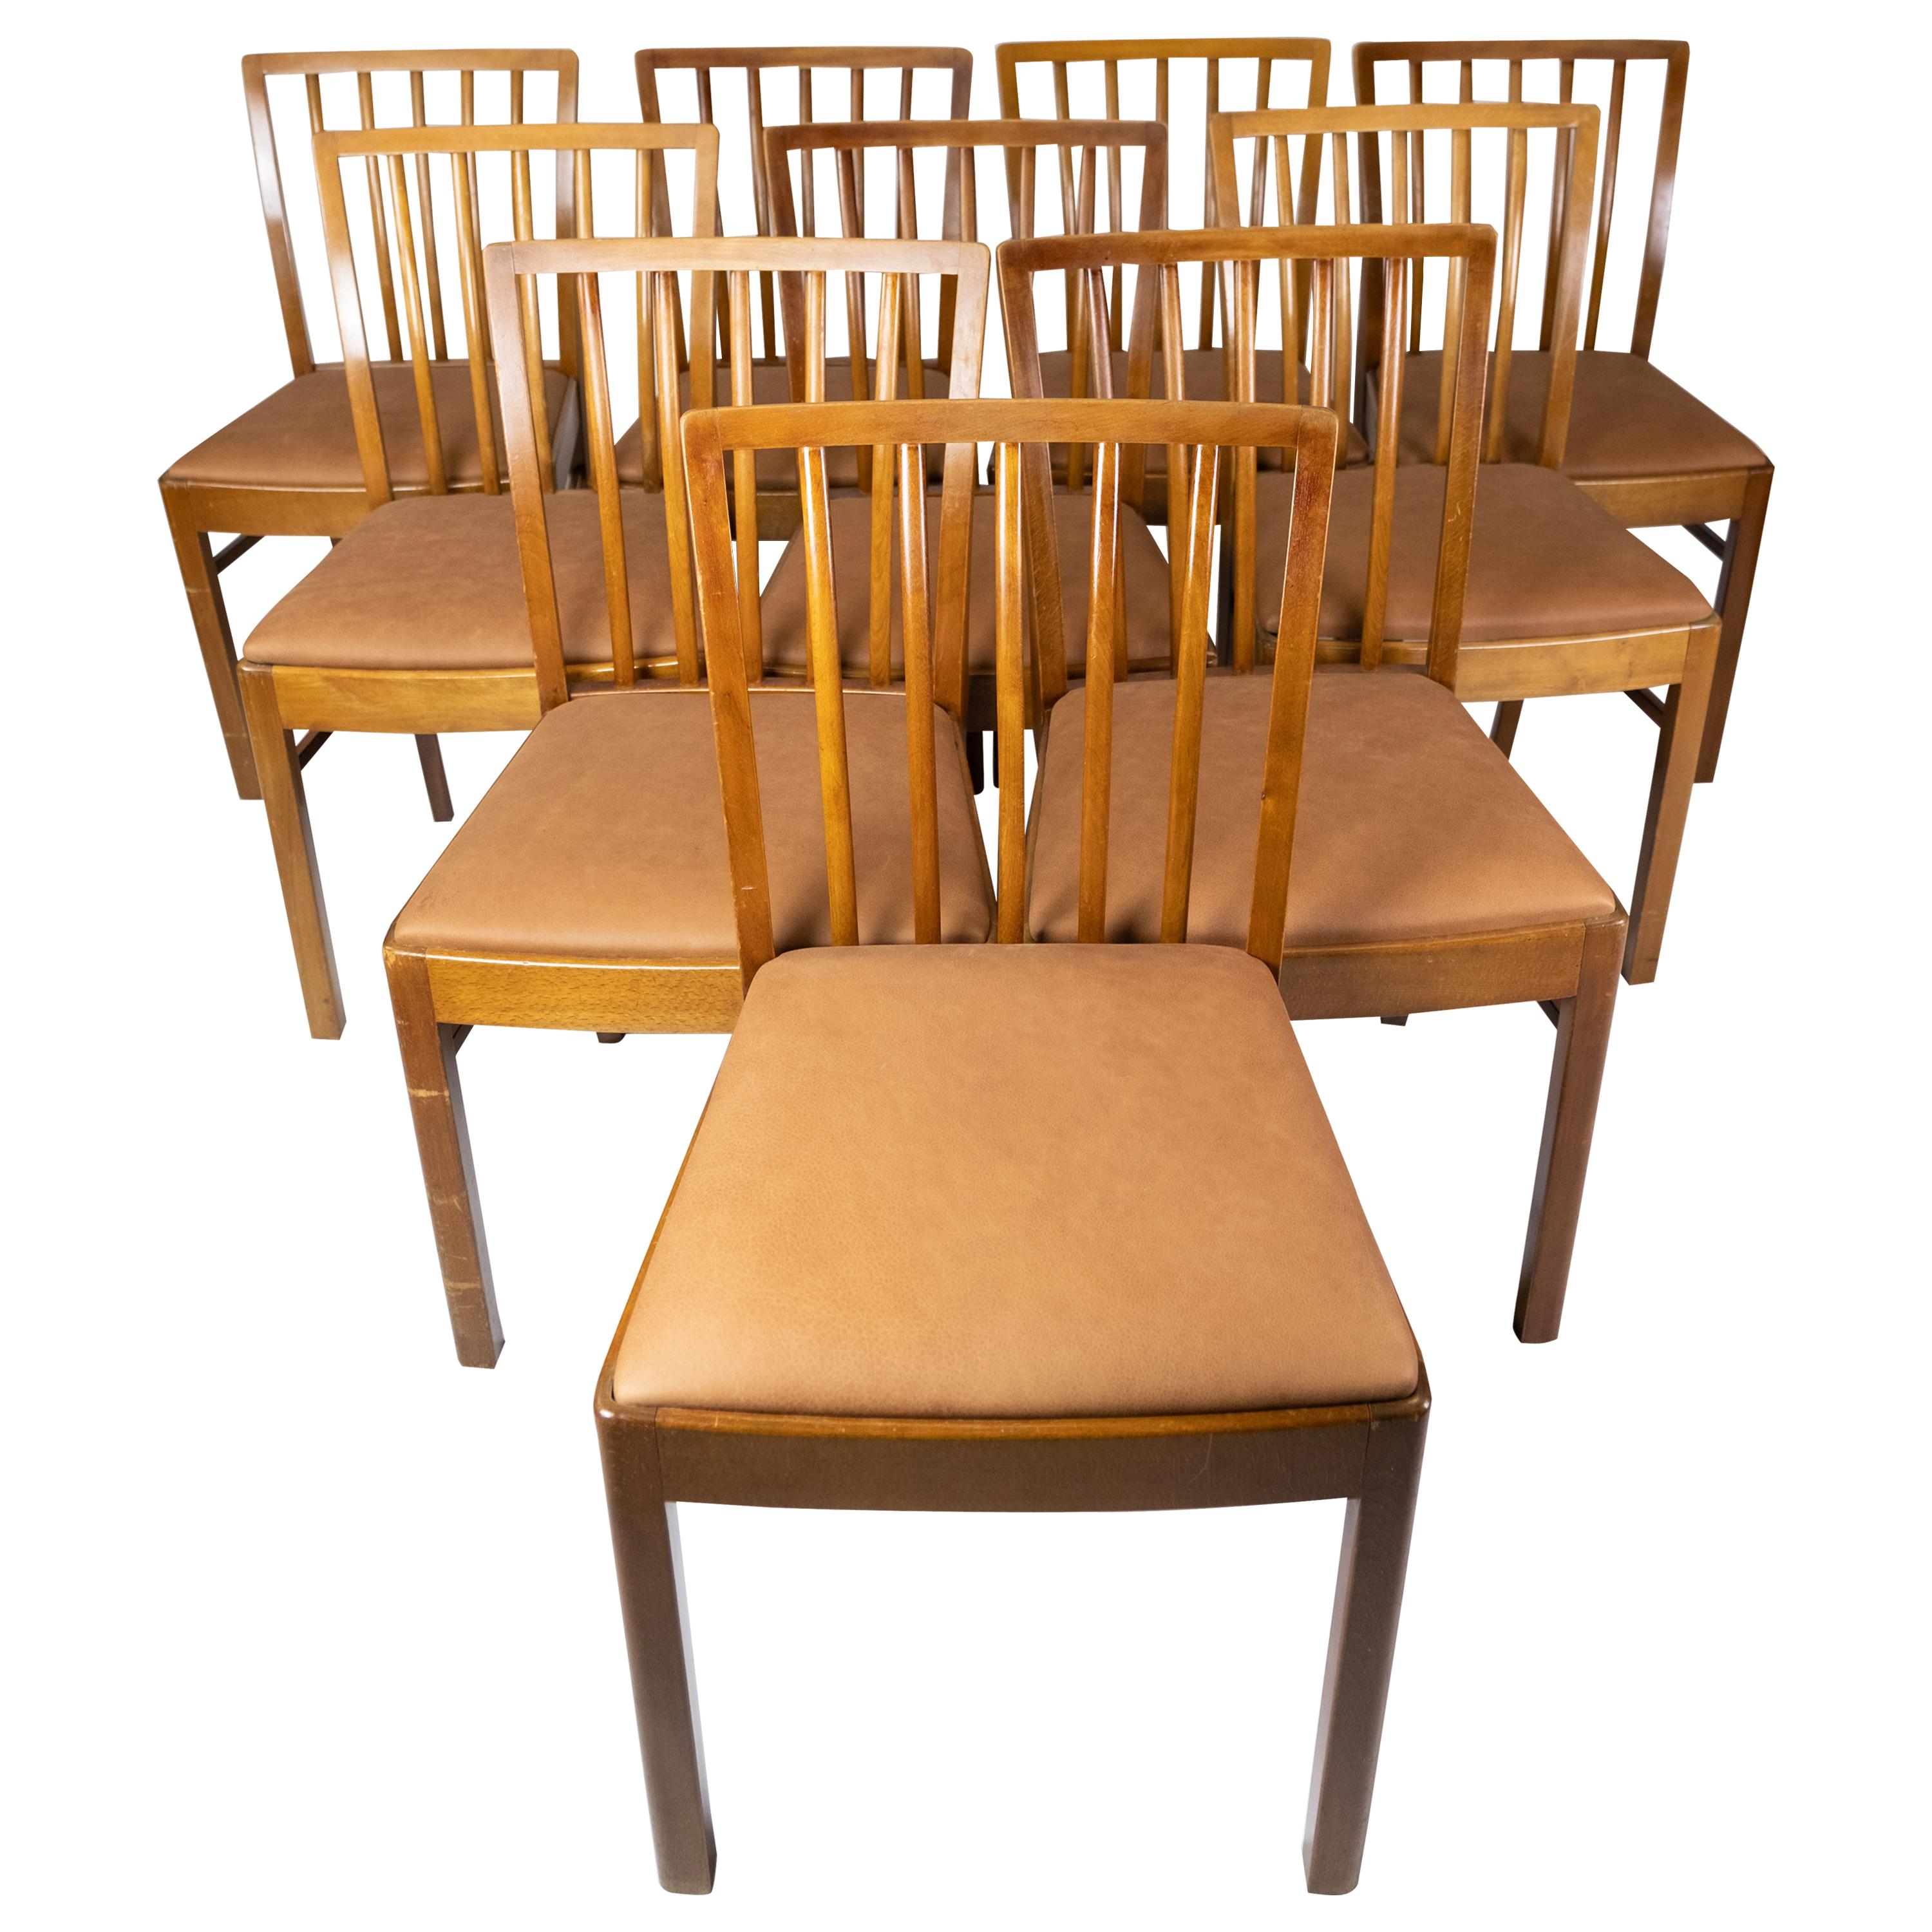 Art Deco Set of 10 Dining Room Chairs of Light Wood and Cognac Leather, 1940s